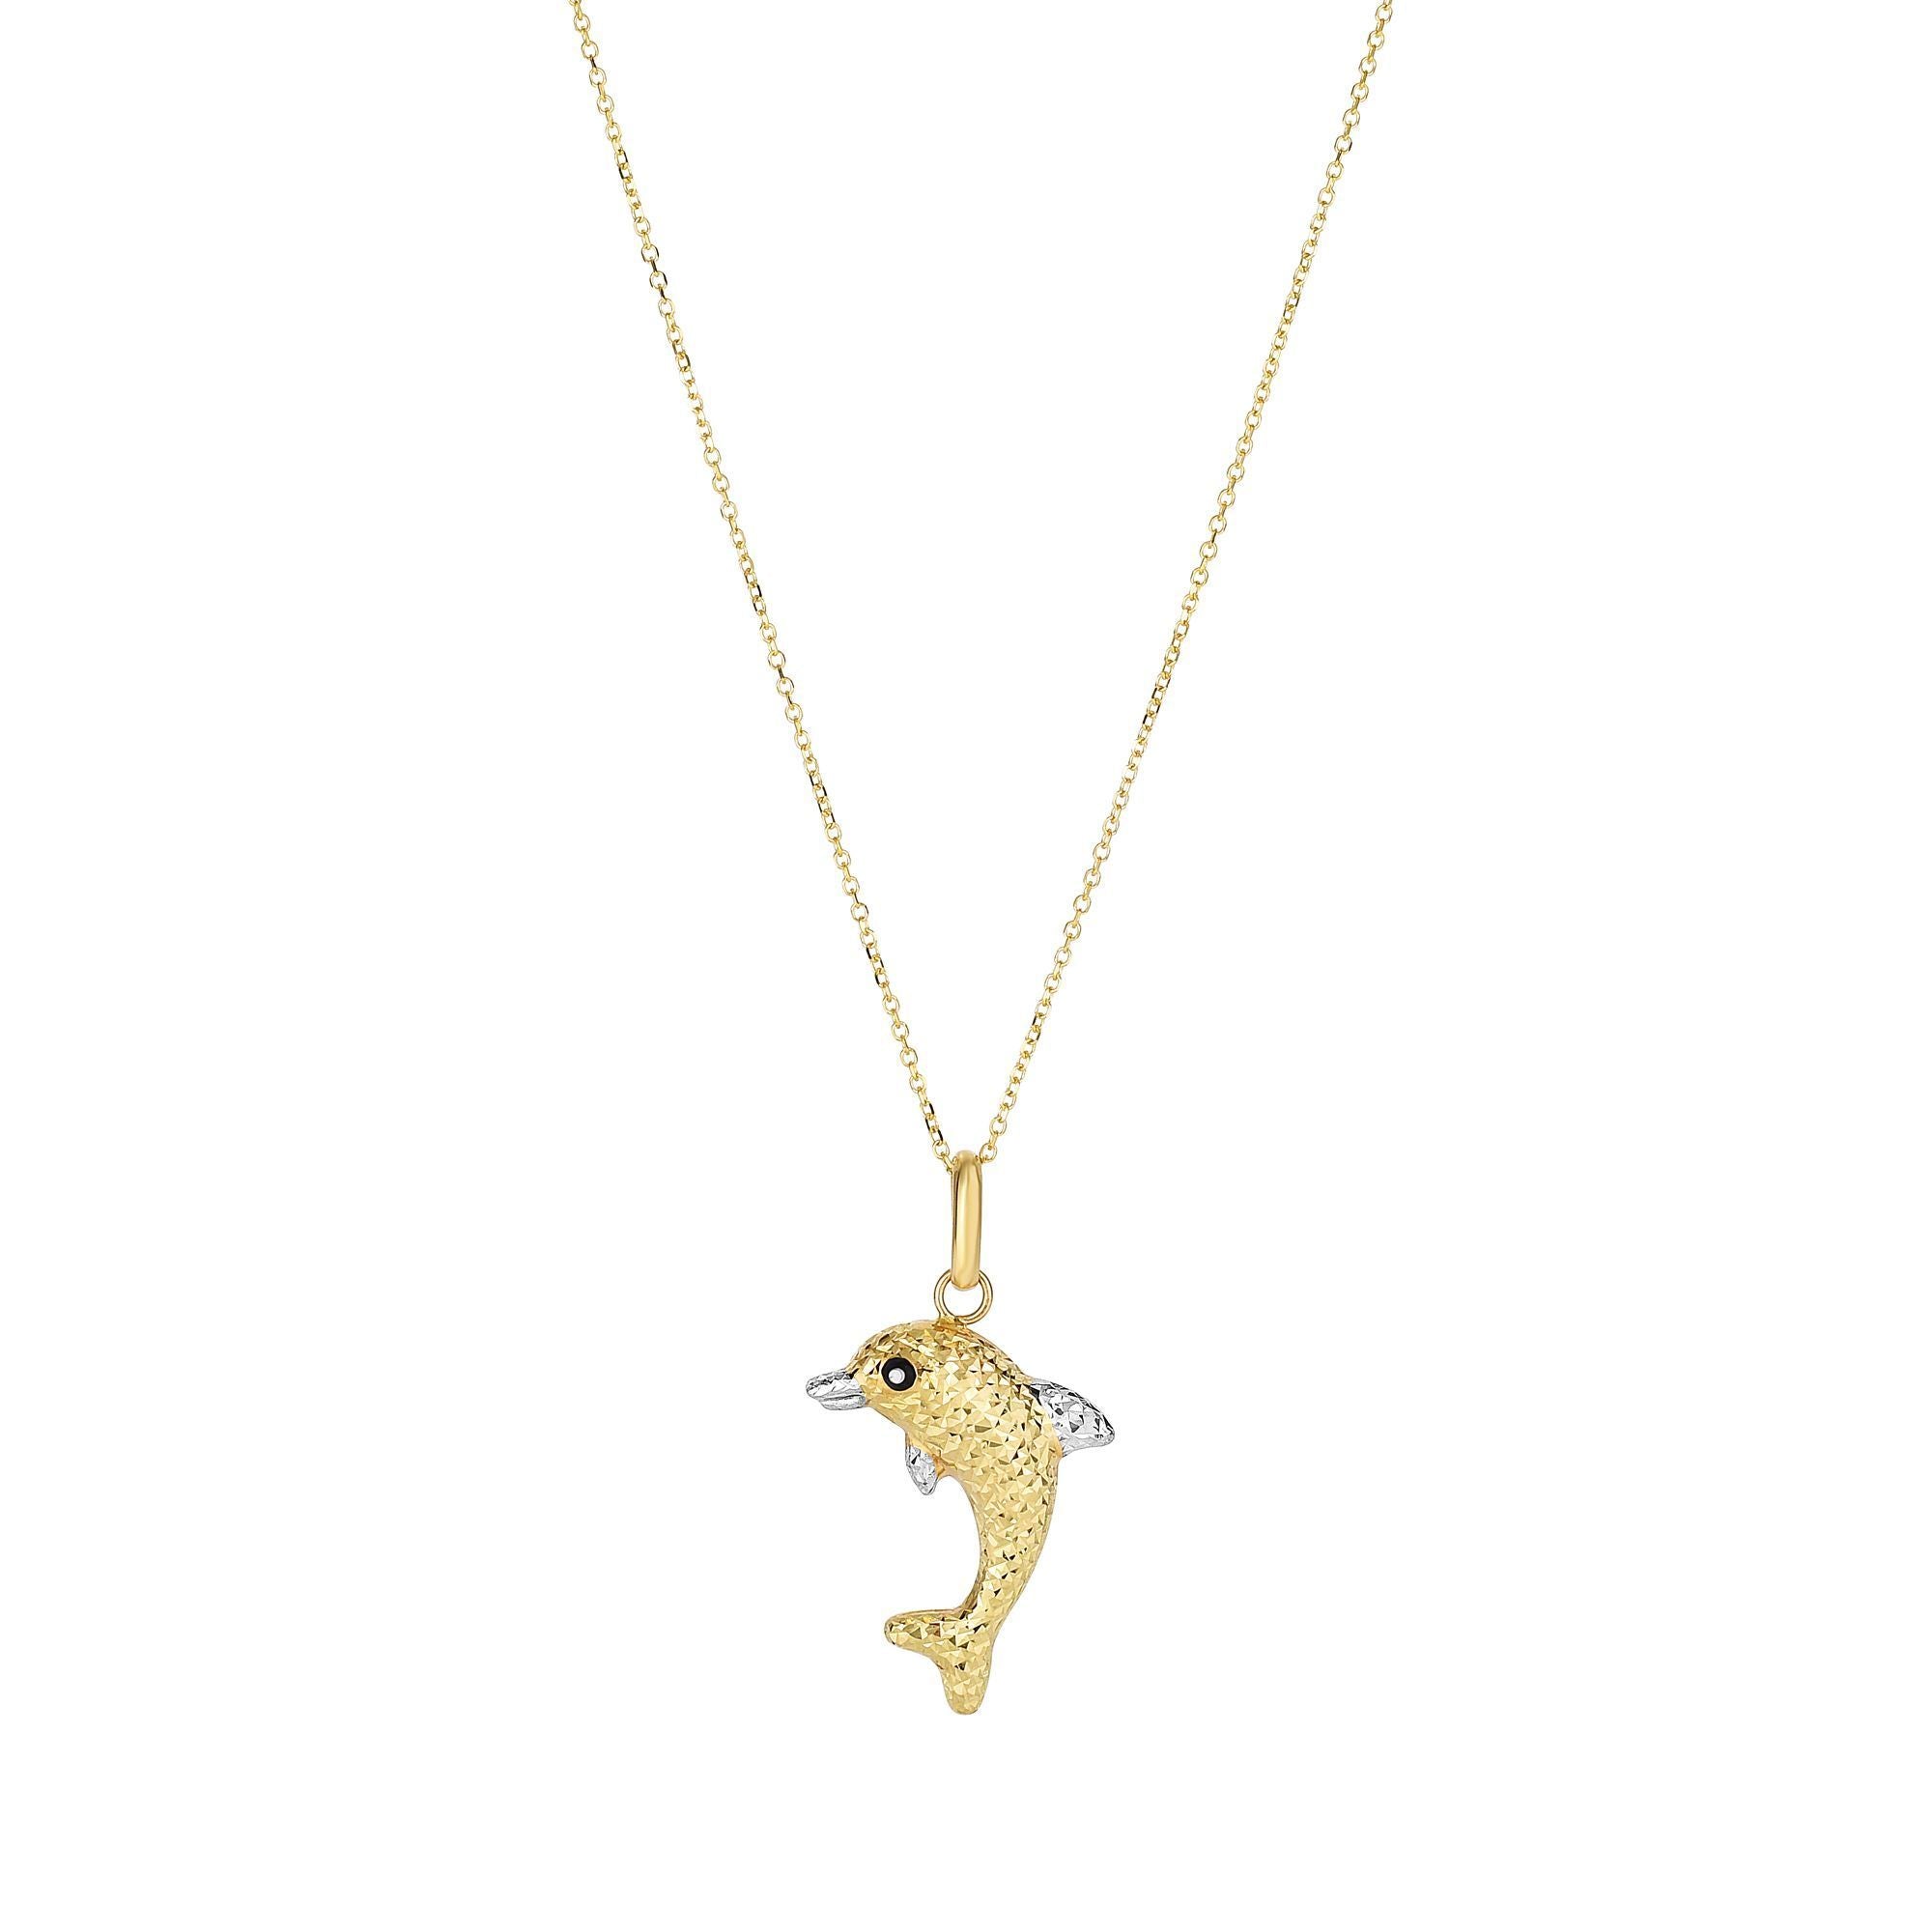 Minimalist Solid Gold Dolphin Necklace - wingroupjewelry